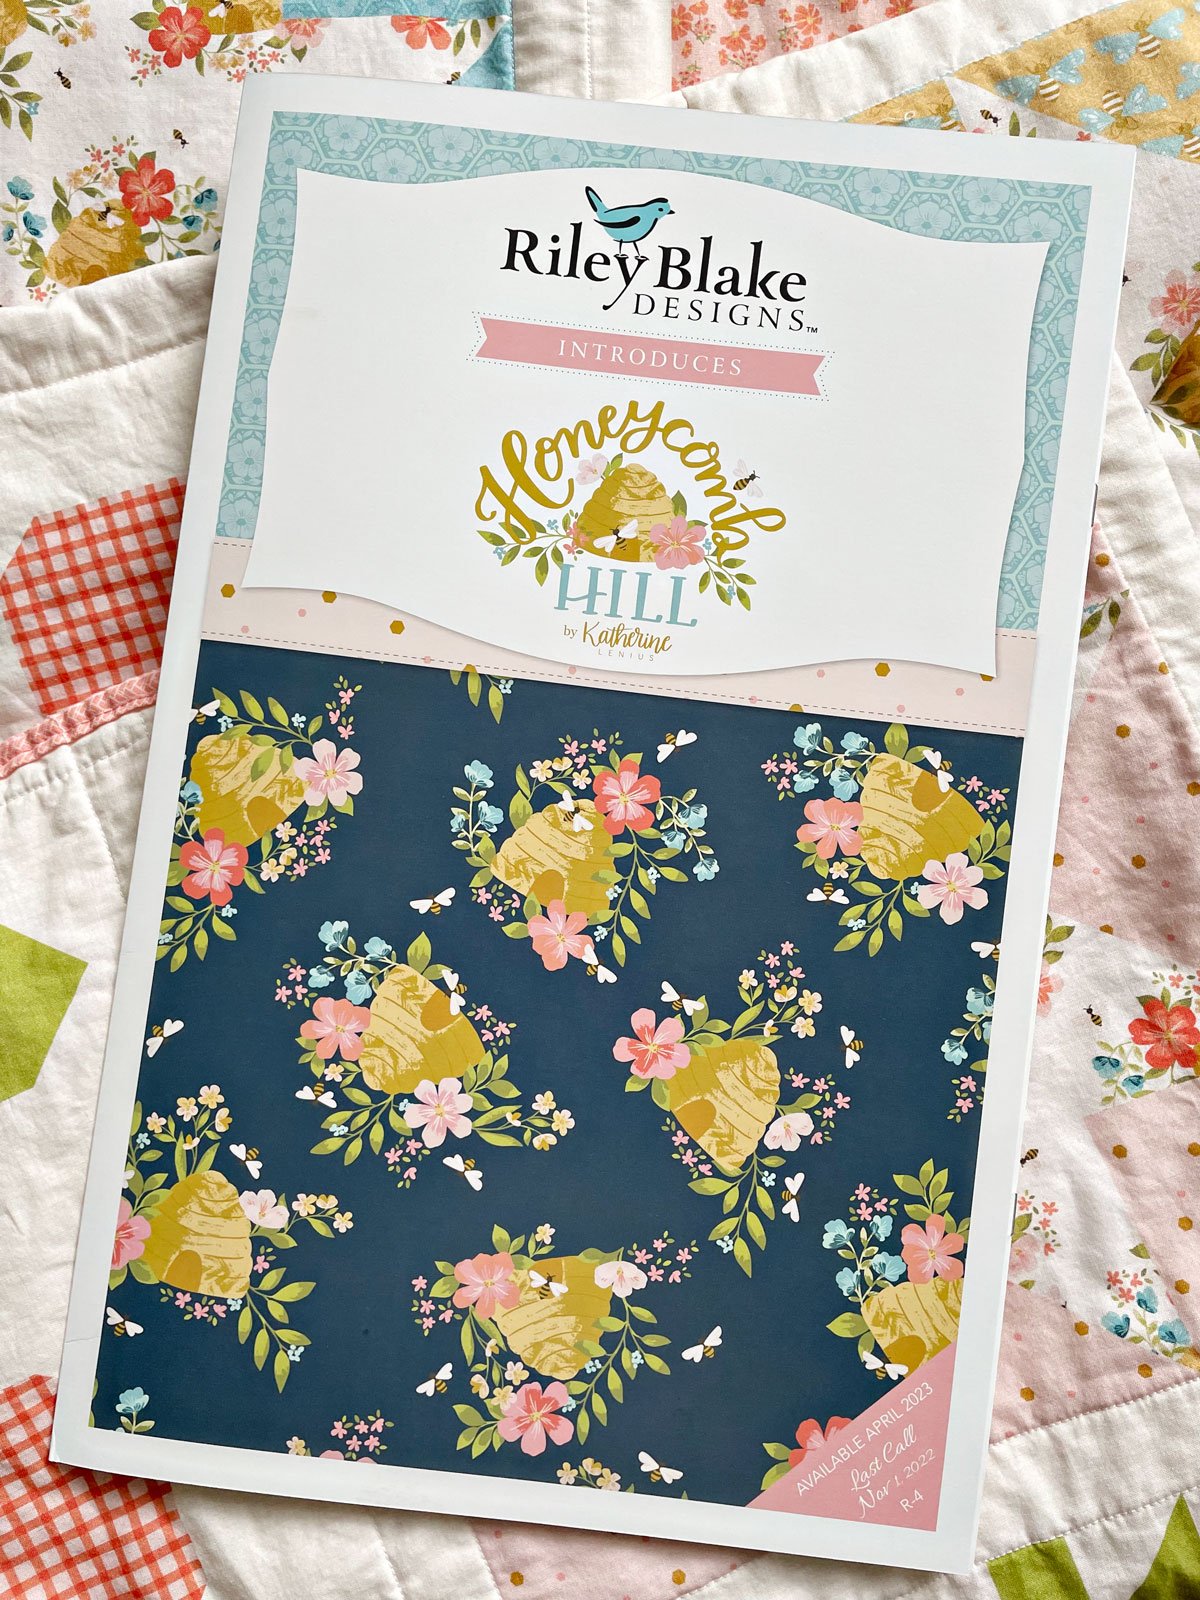 Honeycomb Hill Riley Blake 5-inch Stacker, 42 Precut Fabric Quilt Squares  by Katherine Lenius